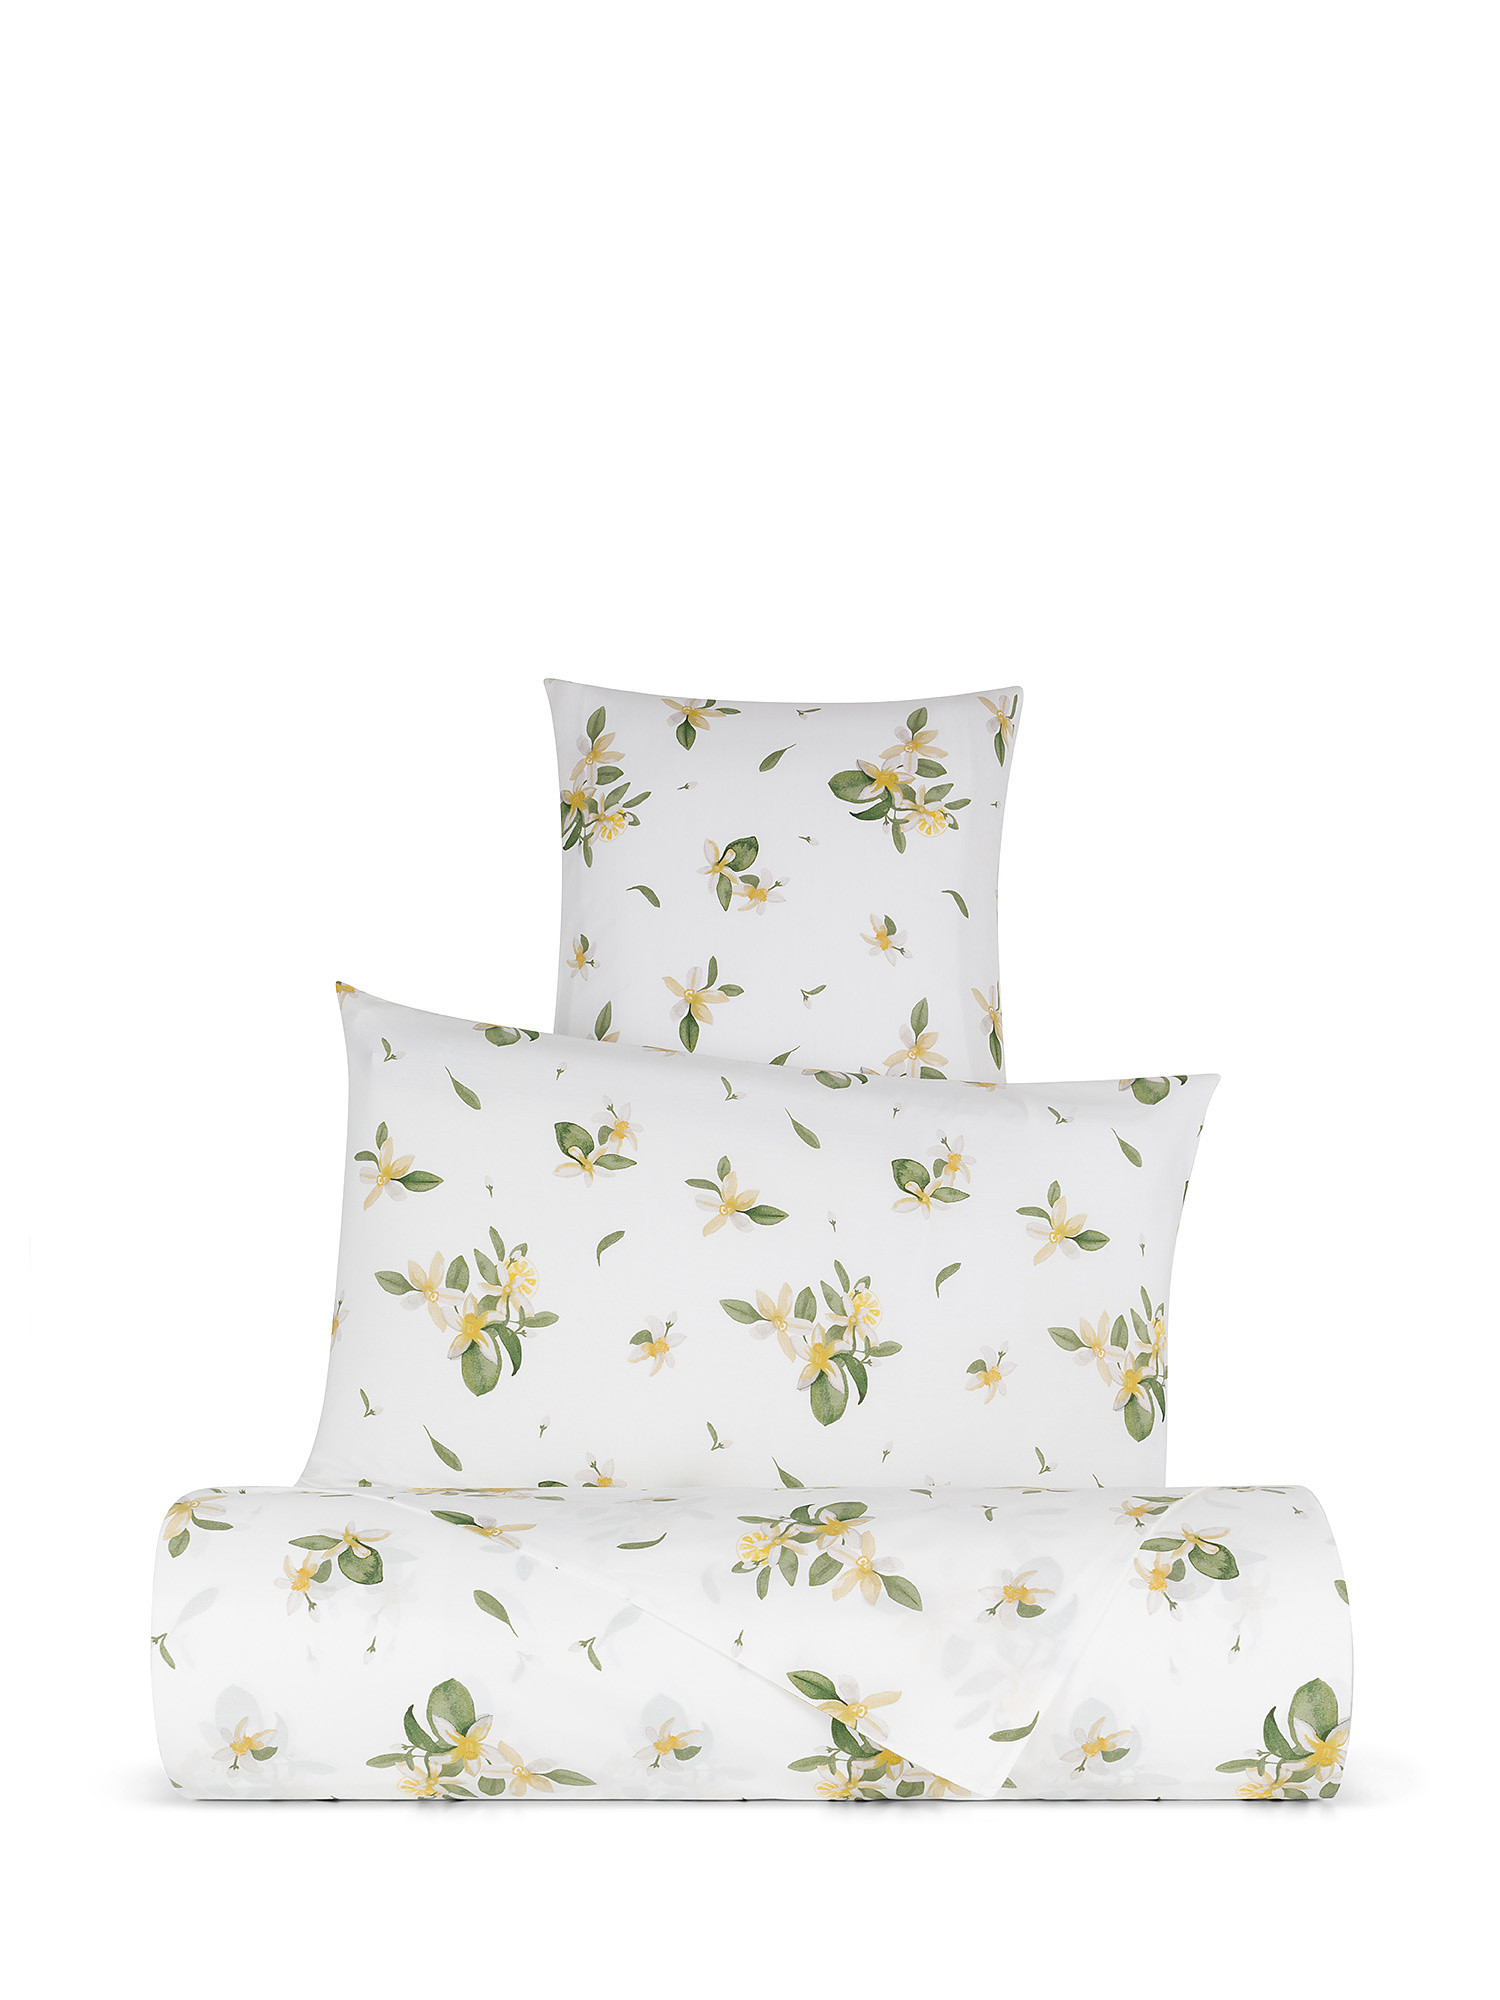 Floral patterned cotton percalle bed set, White, large image number 0